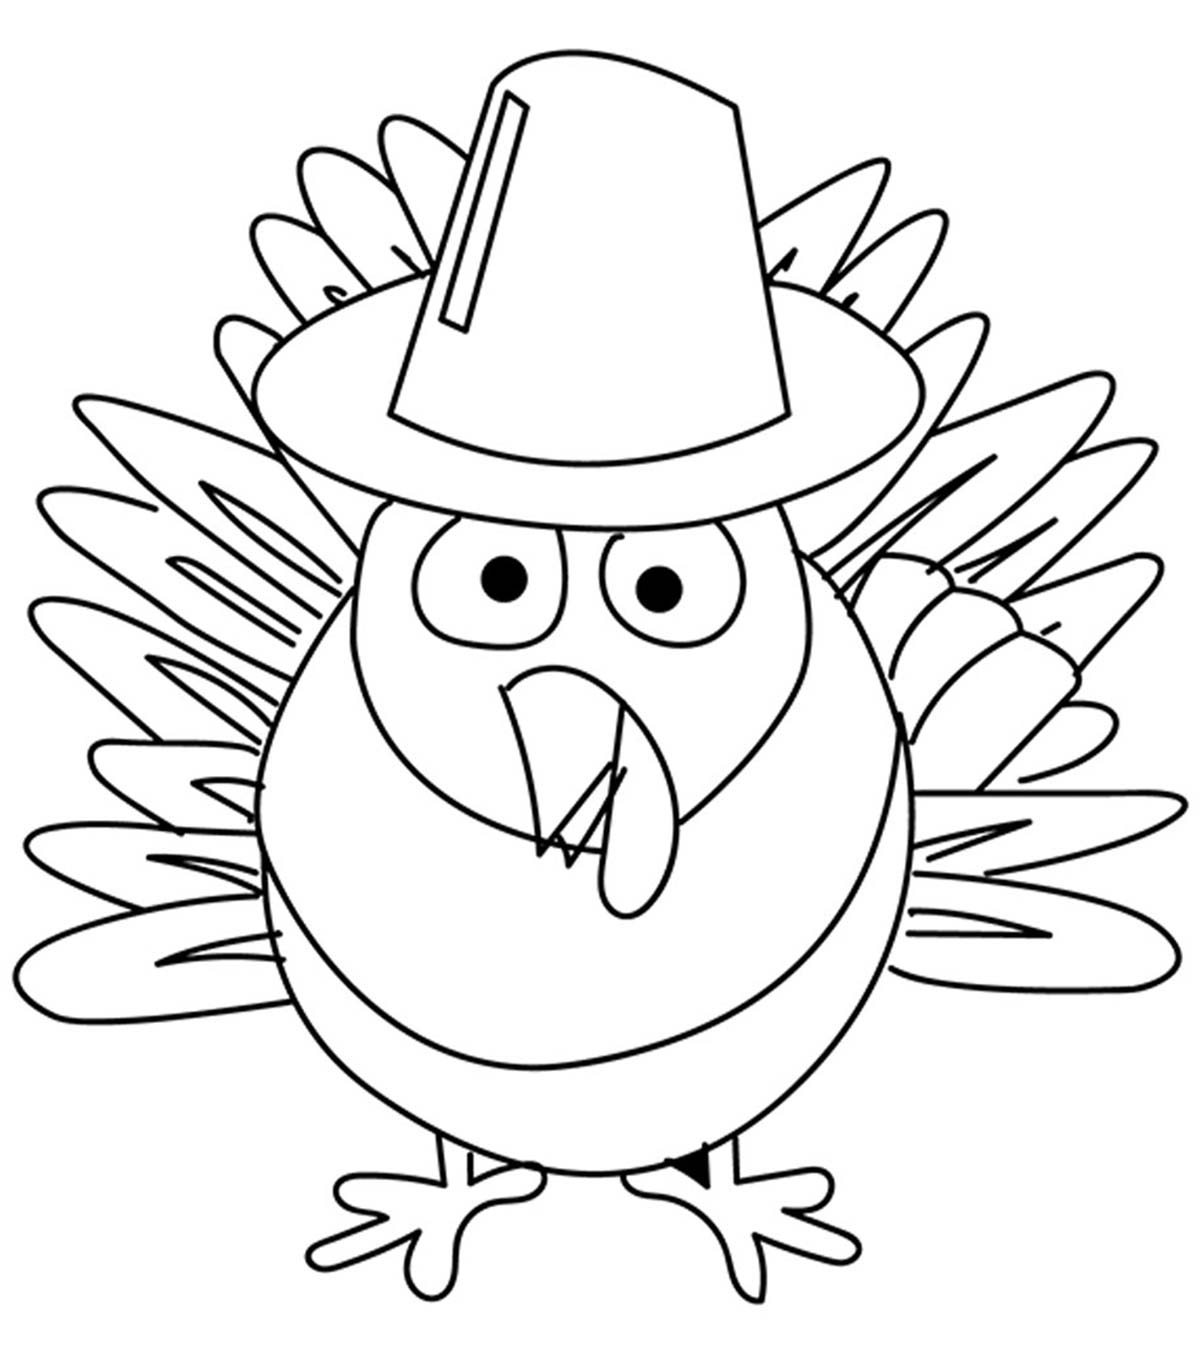 thanksgiving turkey drawings in color